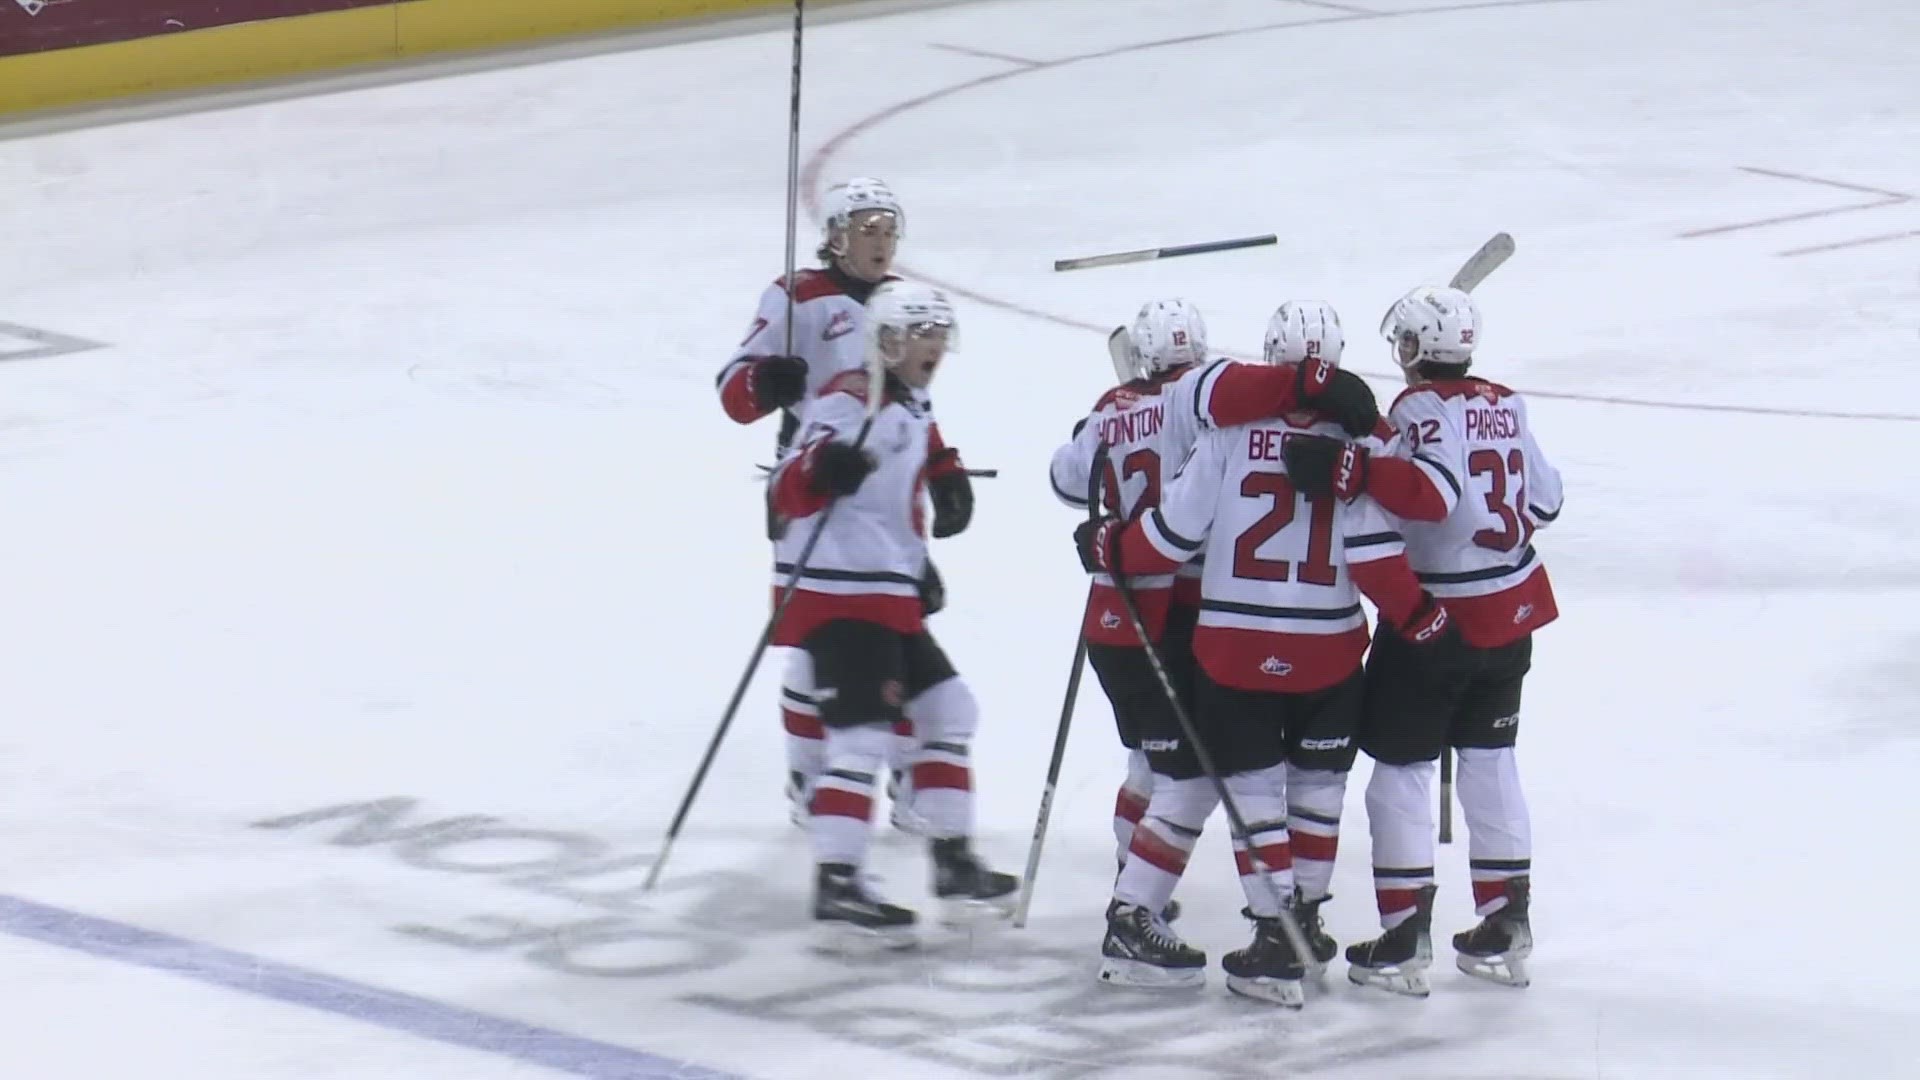 The Spokane Chiefs dropped game three of their playoff series against Prince George 4-2. The Chiefs will look to avoid a sweep on Wednesday night.